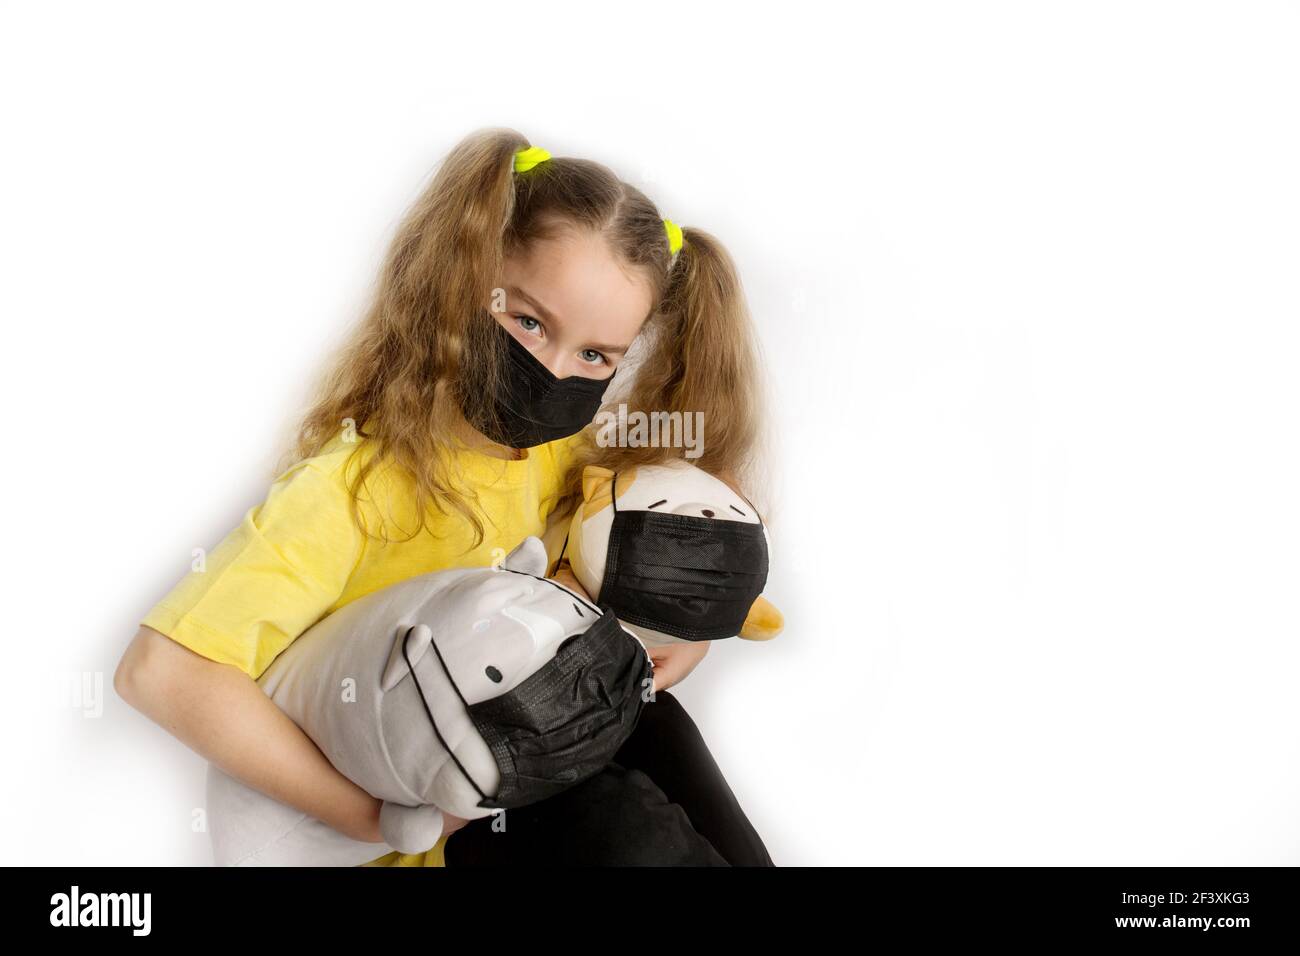 Girl in a yellow t-shirt and black mask covid19 on a white background with toys in a black covid mask Stock Photo